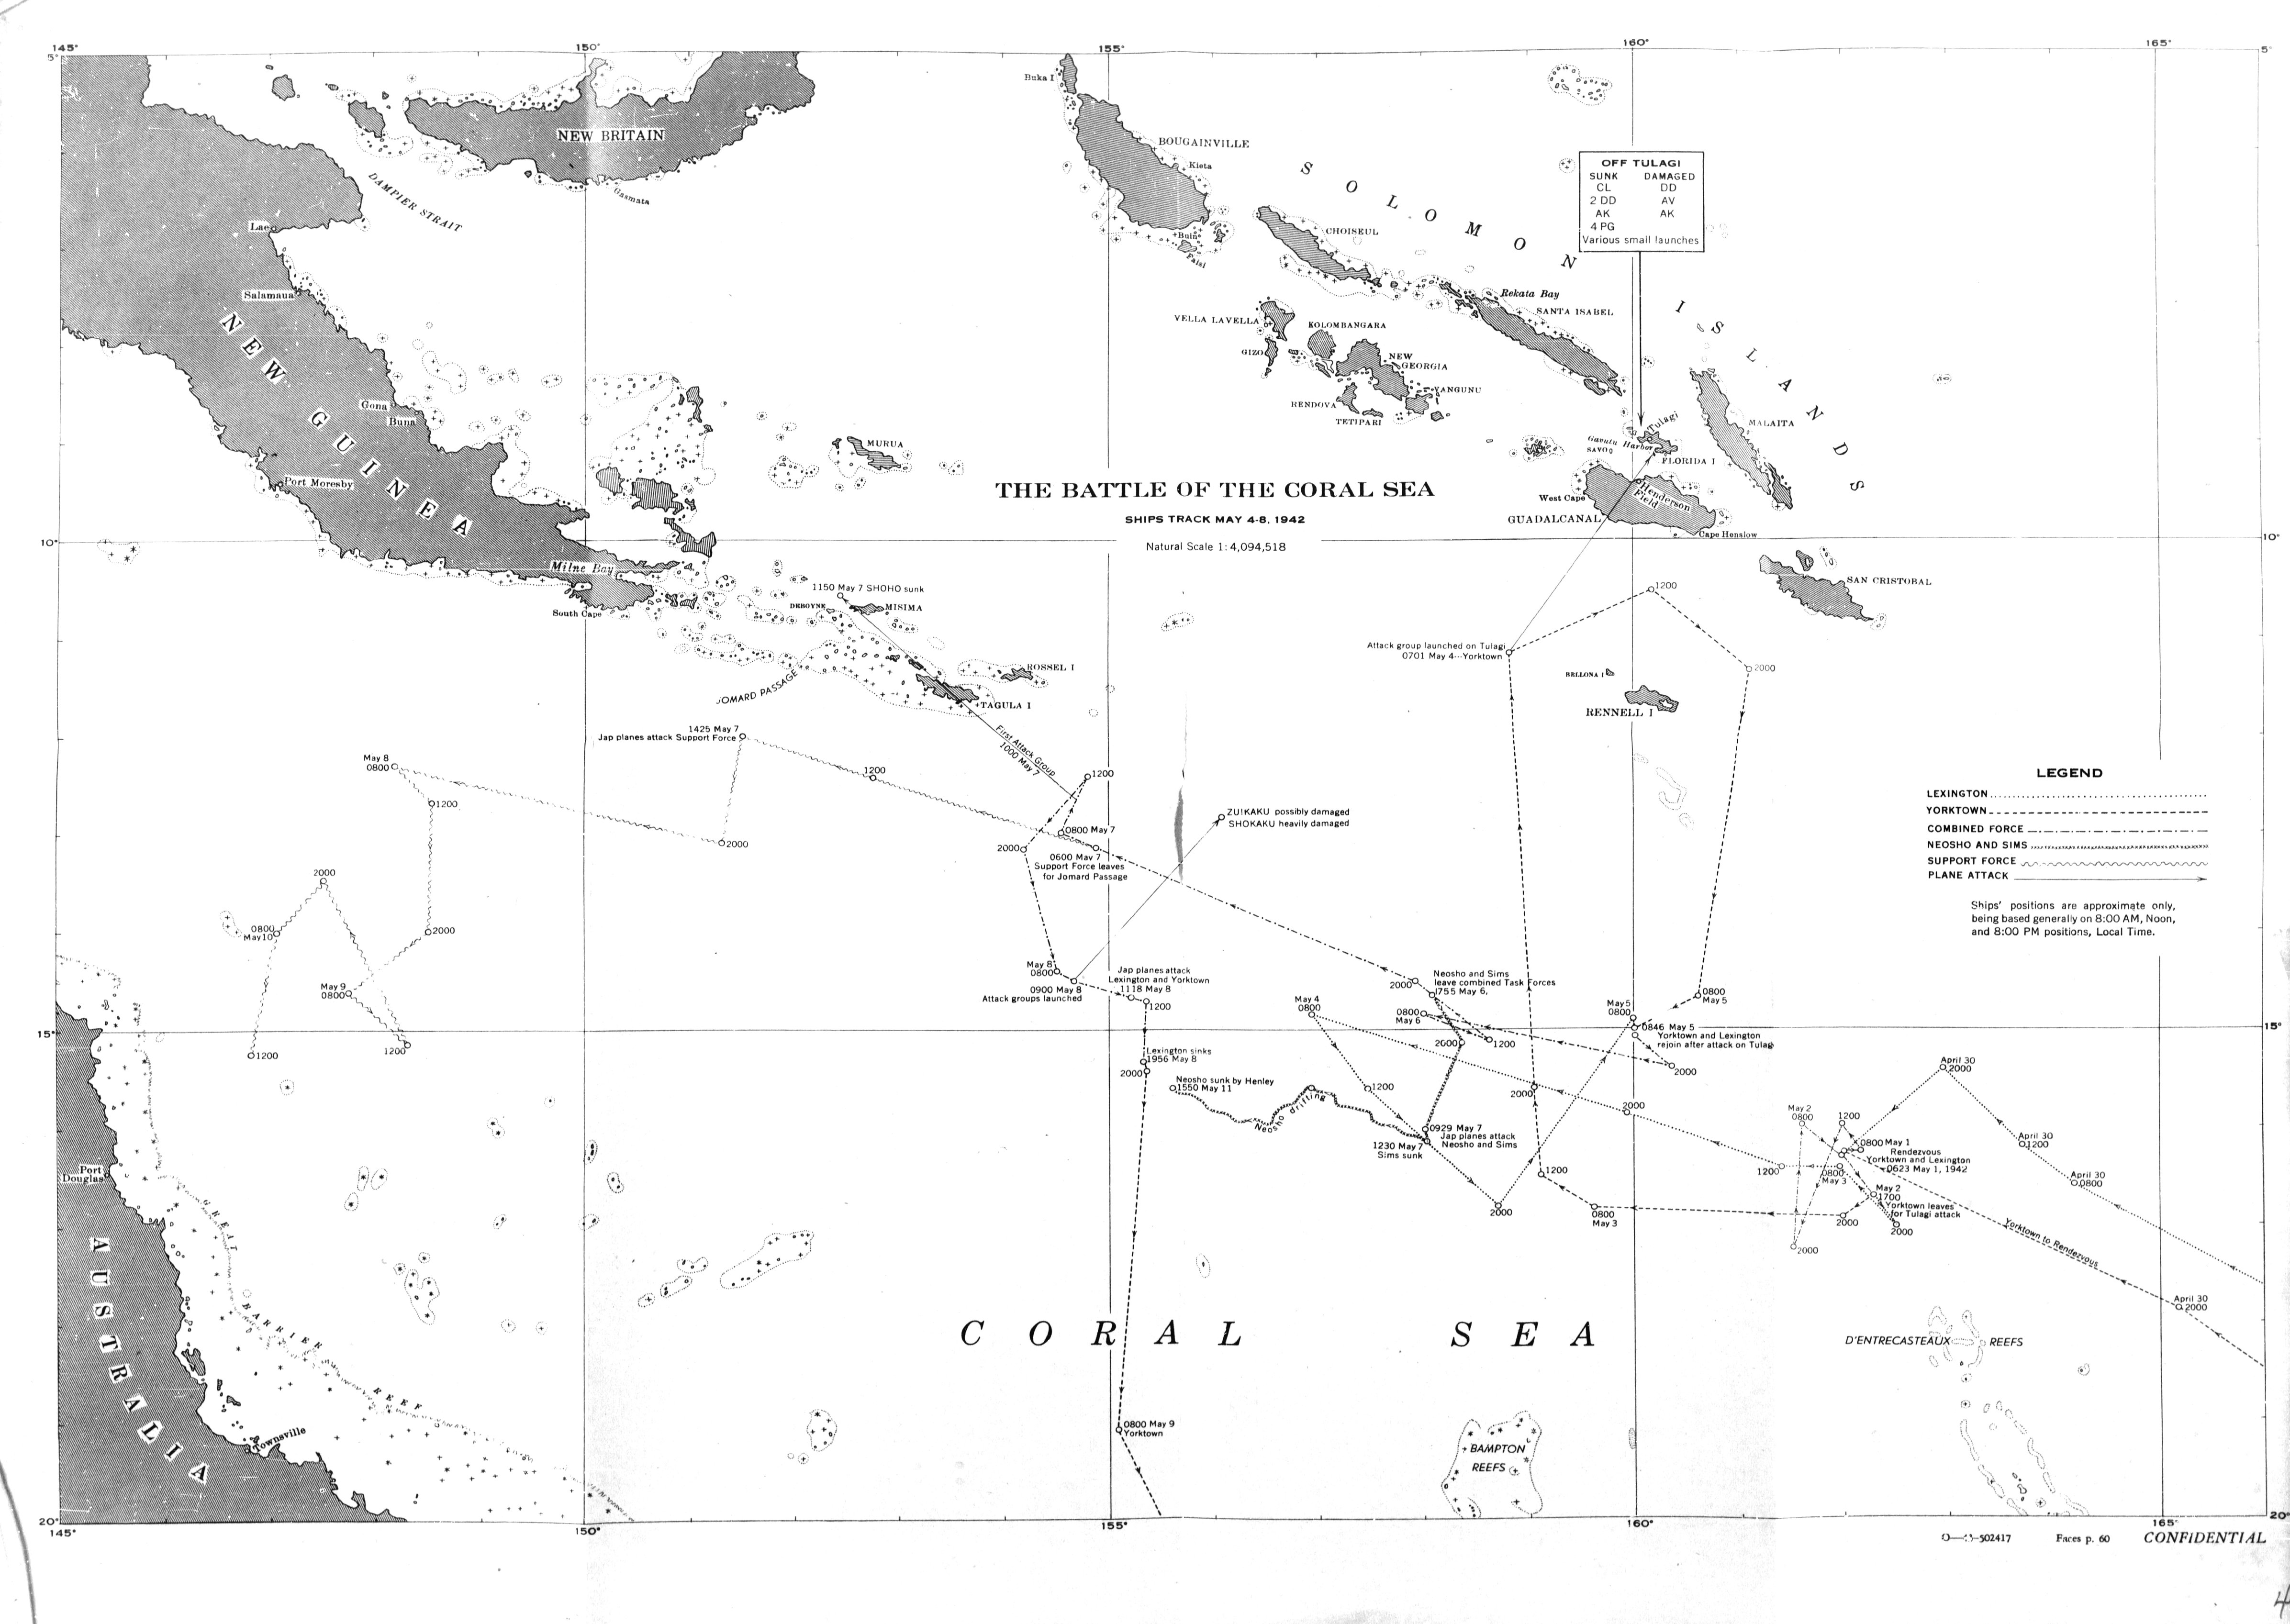 Track of the Battle of the Coral Sea, 8 May 1942, prepared for the United States Navy Office of Naval Intelligence Combat Narrative report.